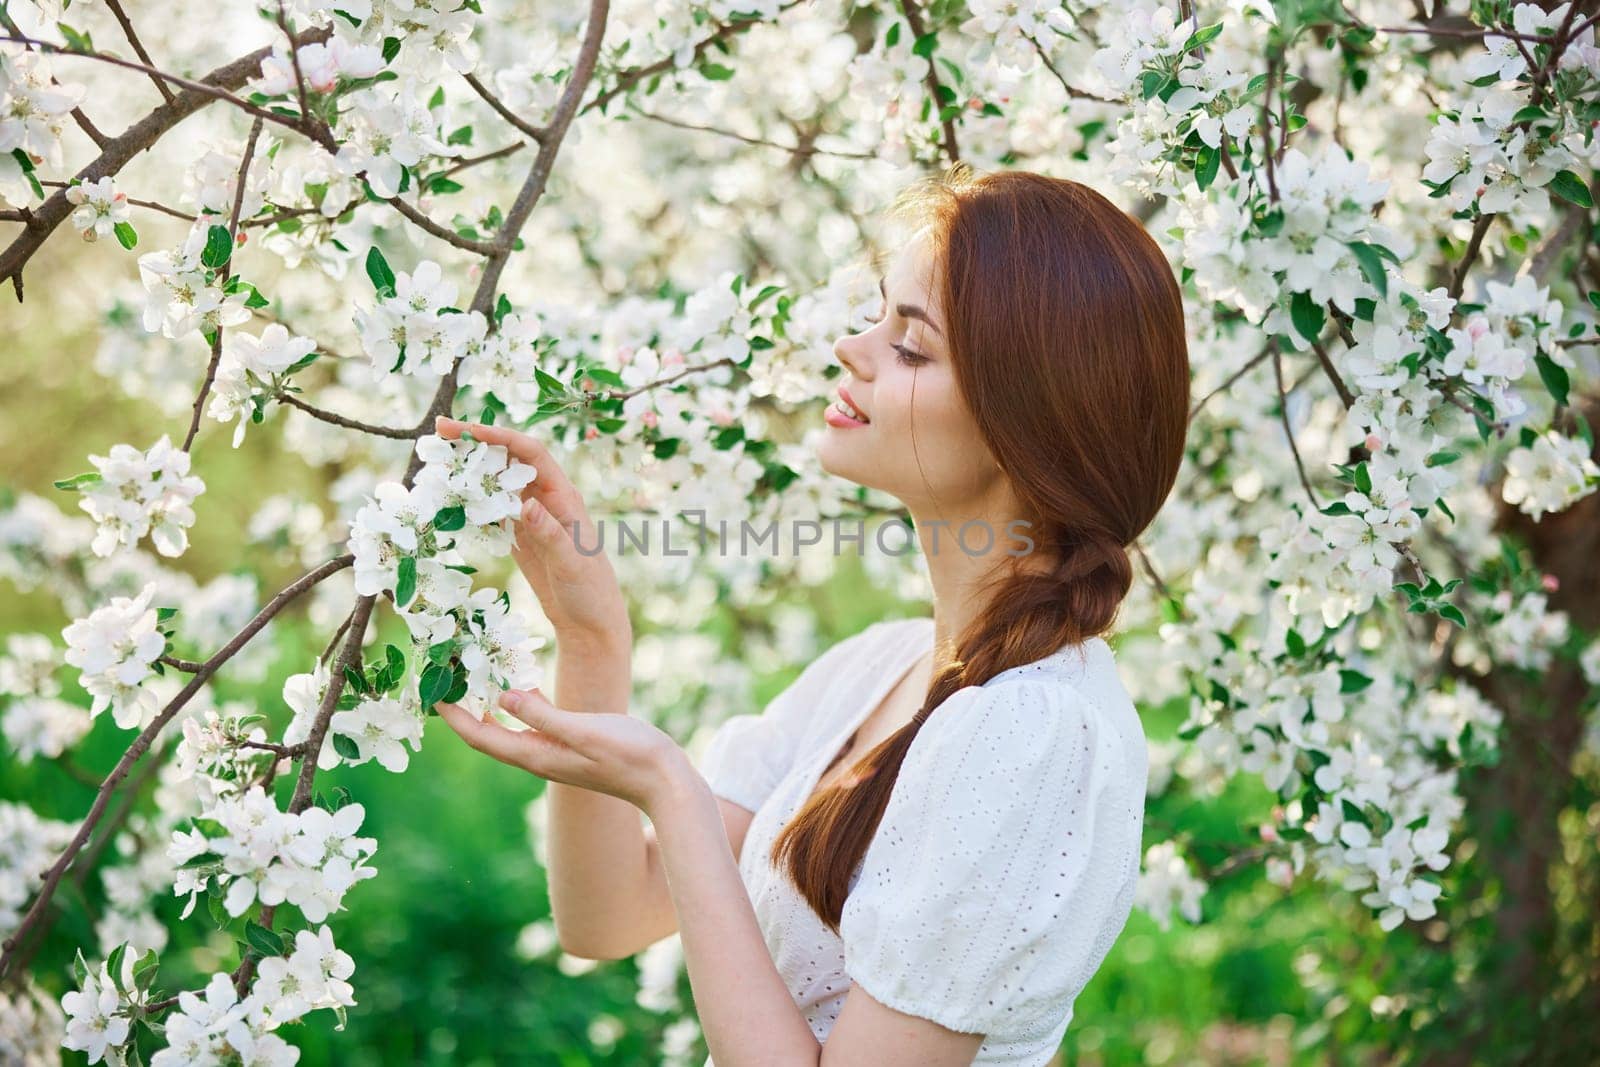 beautiful, cute woman touching flowers on a tree in the garden. High quality photo